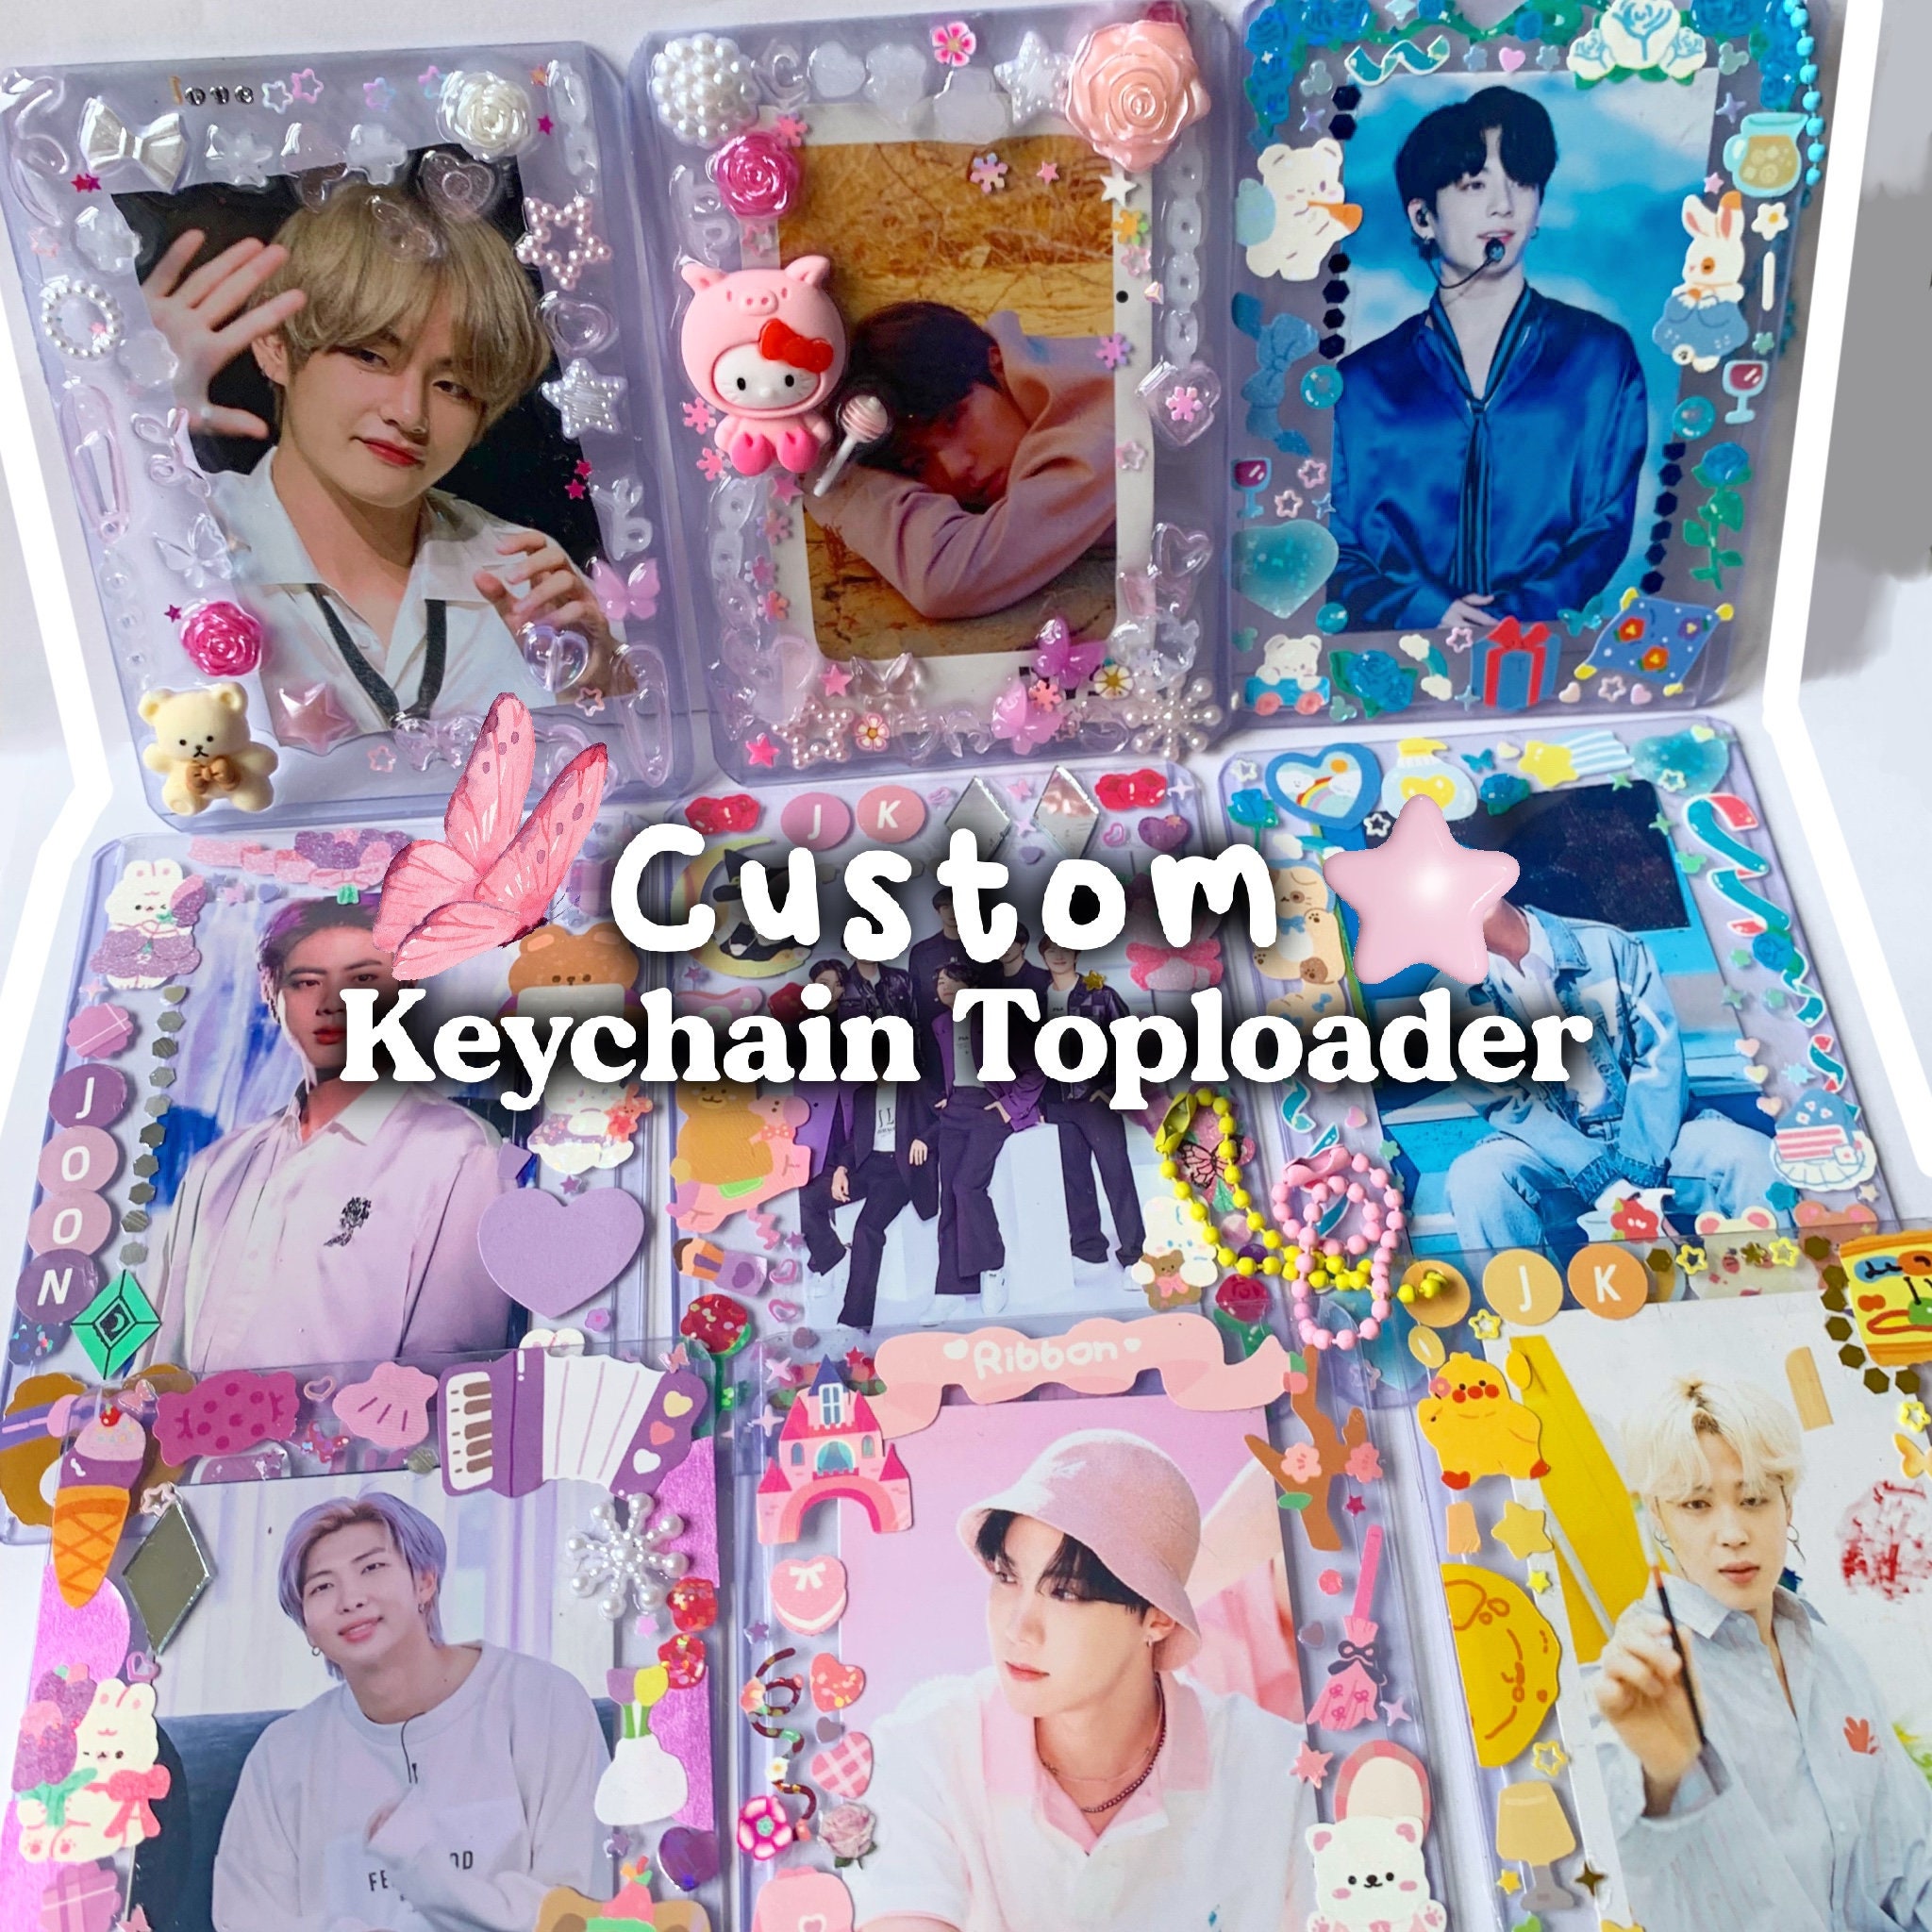 Photocard Holder Deco Stickers Top loaders Deco DIY Set for photocards  Kpop, 10pcs Hard Photo Card Holder, 12 Sheets Deco Stickers, 1pc Stand Kpop